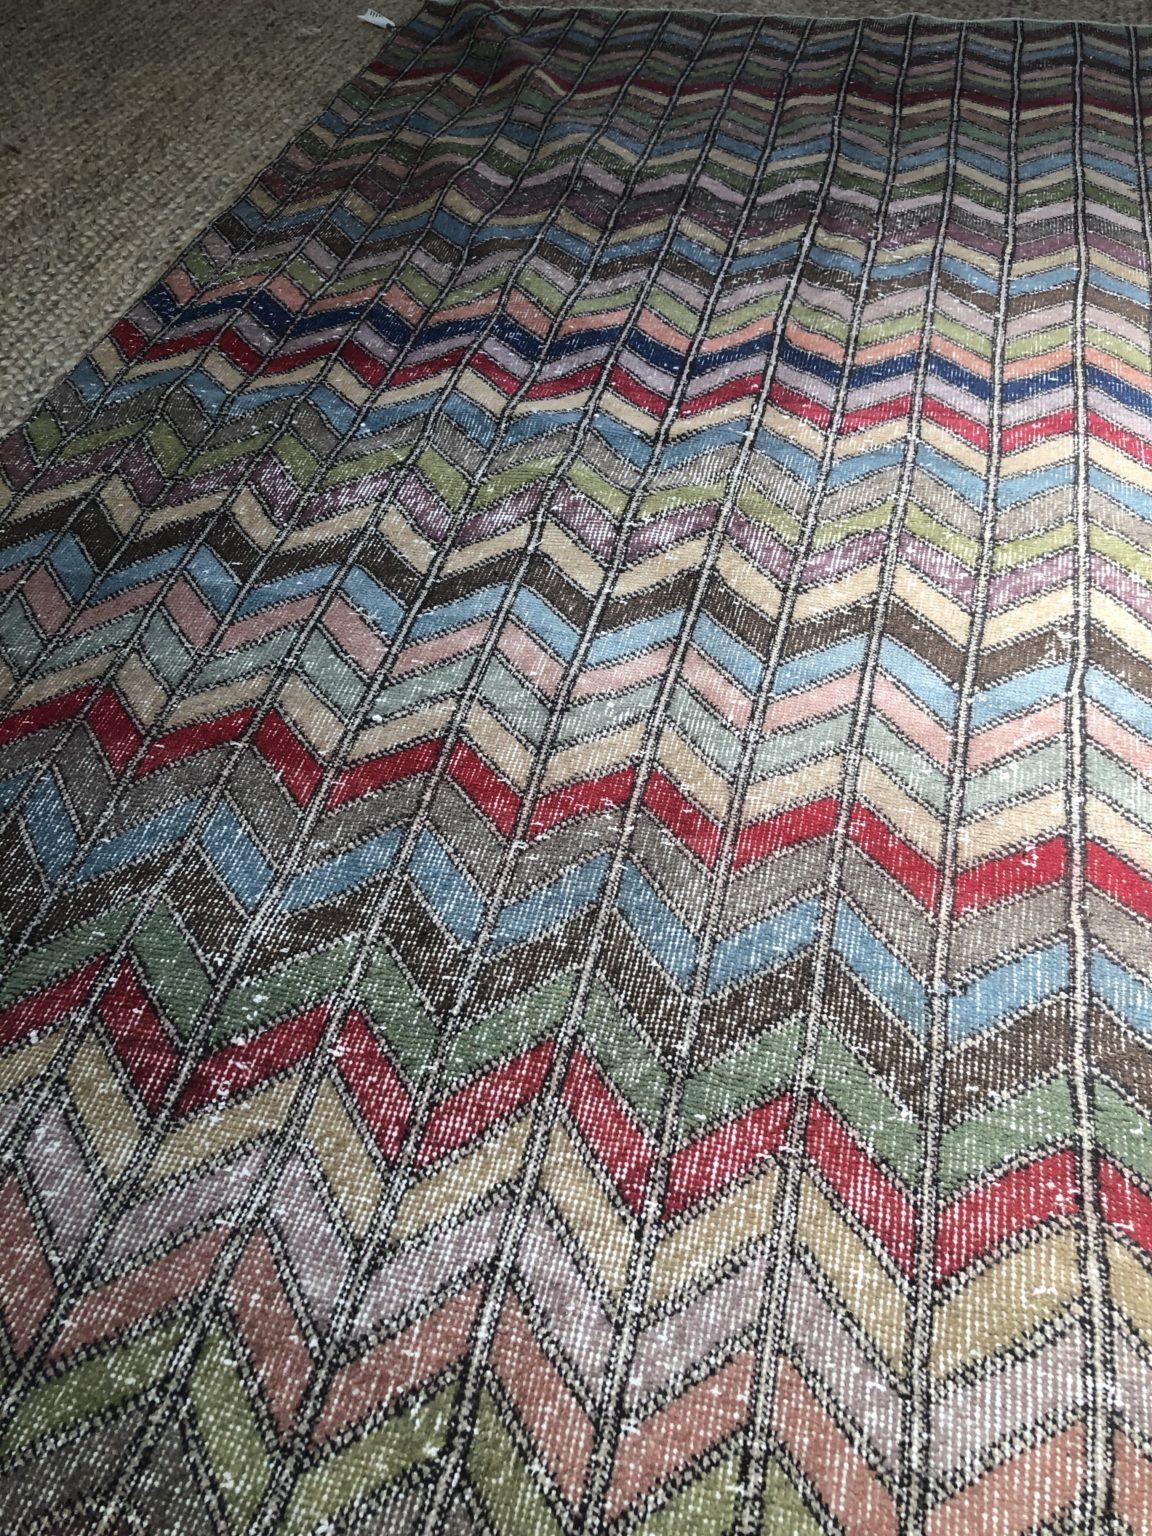 Multicolored Scandinavian Chevron Rug 10’6″ x 6′ In Good Condition For Sale In Sag Harbor, NY